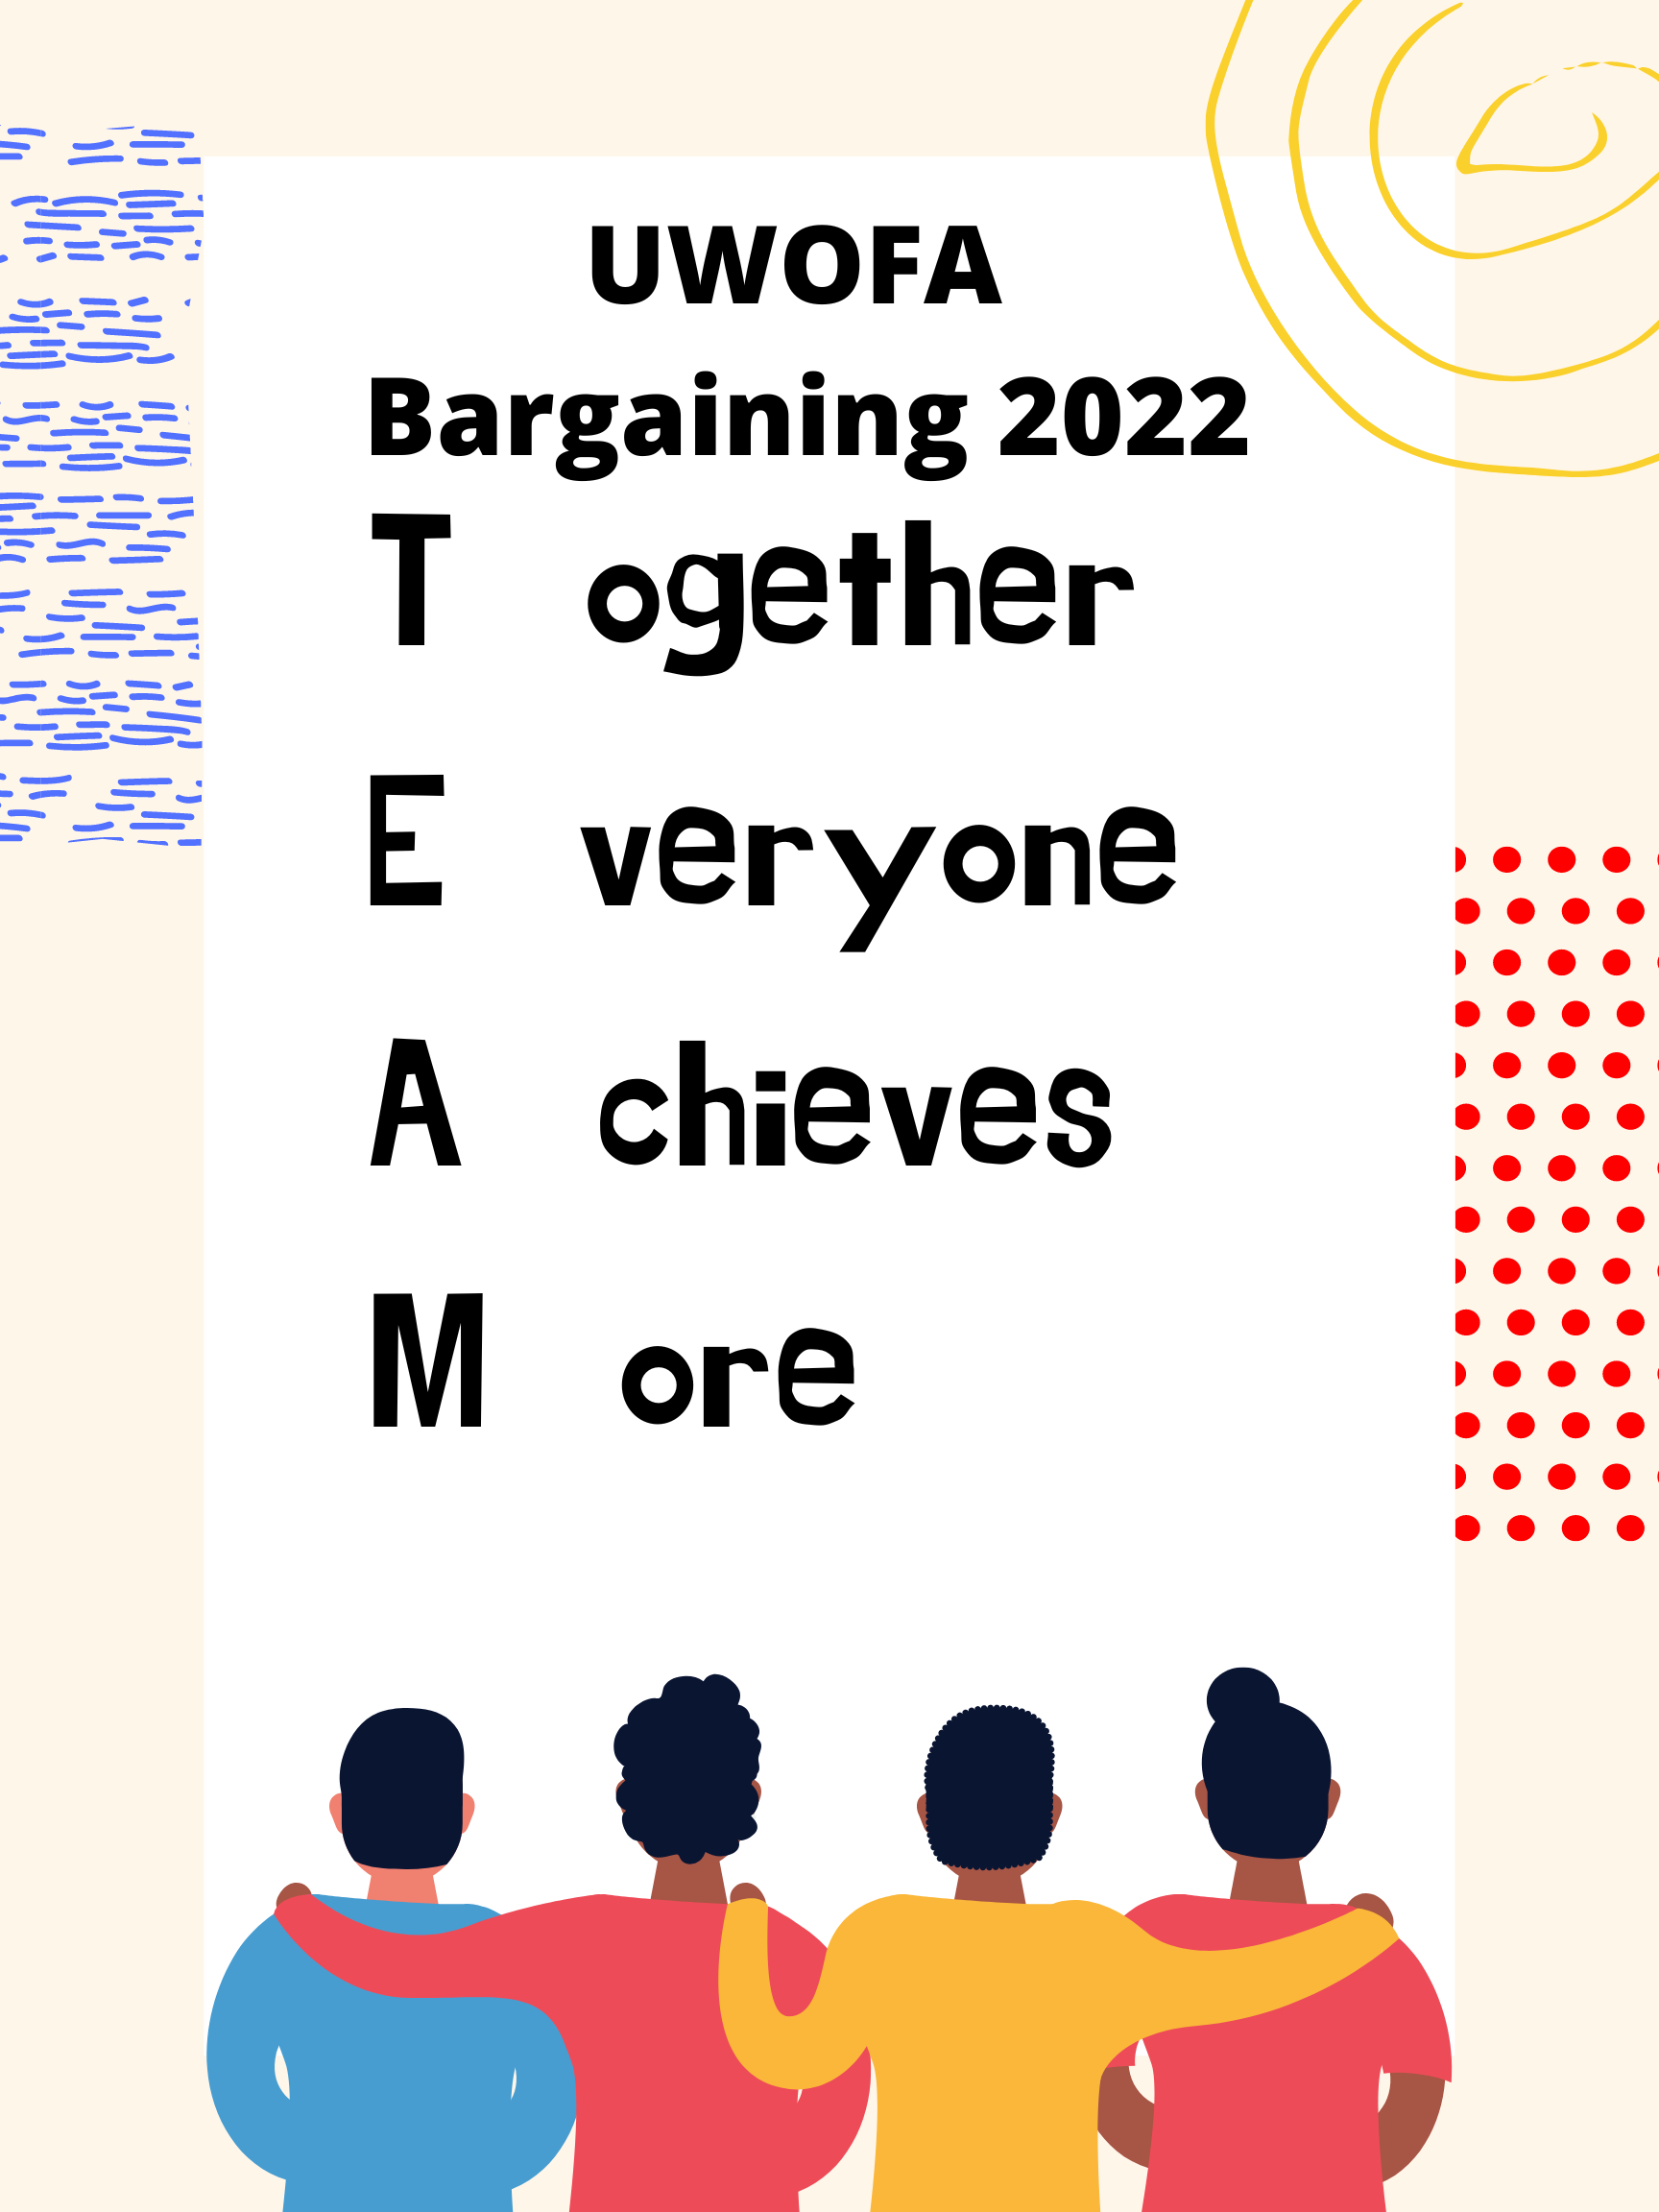 UWOFA bargaining, text writing Together Everyone Achieves More, image of a group of people standing shoulder to shoulder